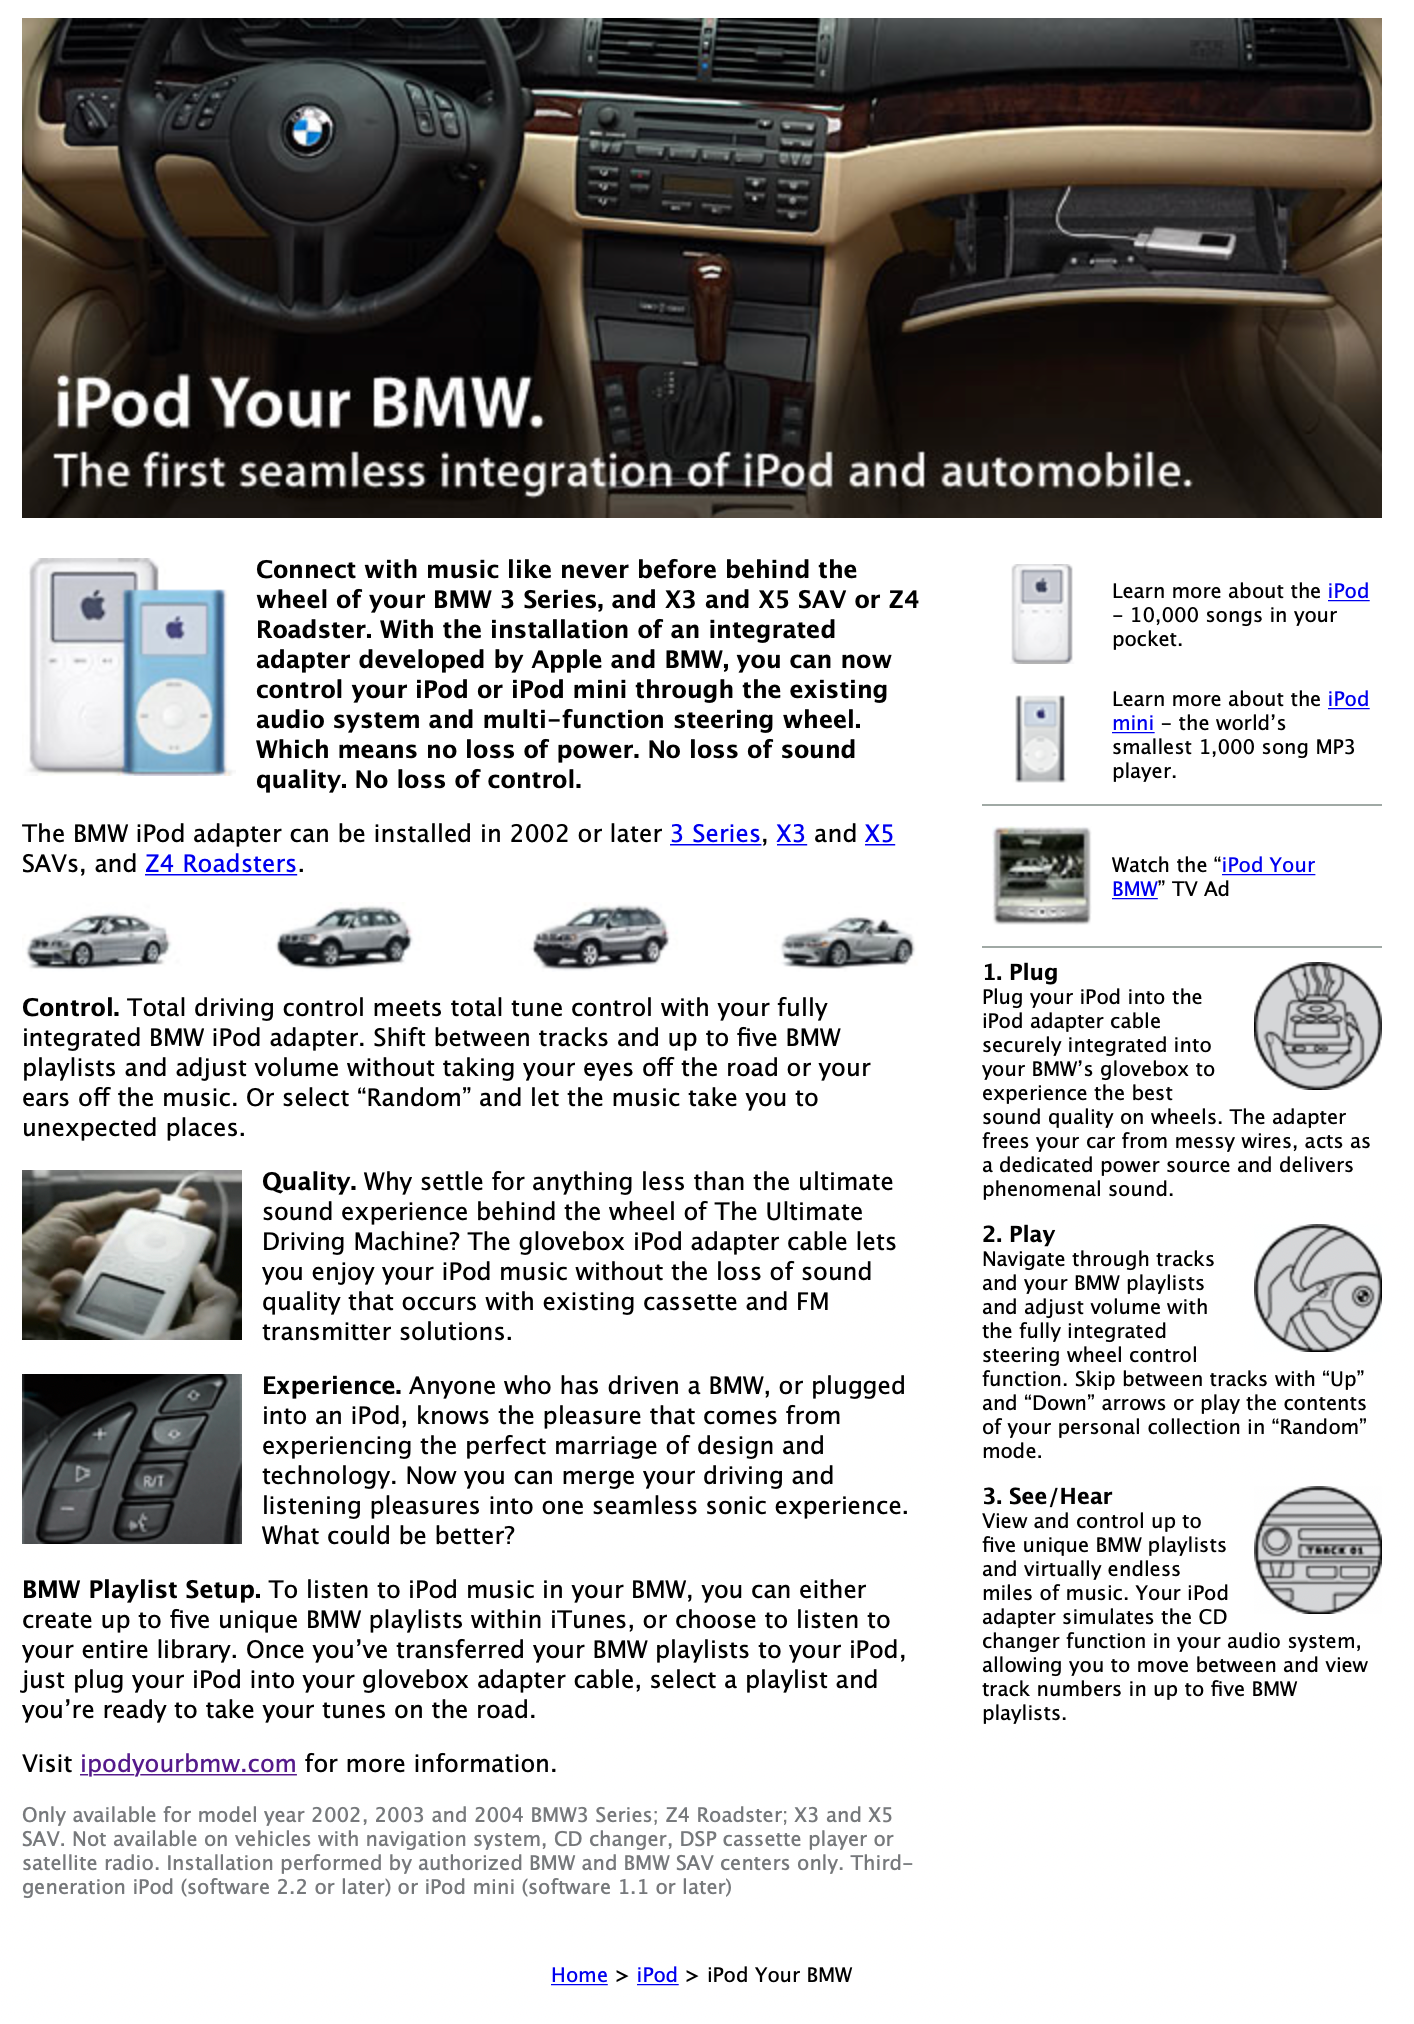 iPod Your BMW